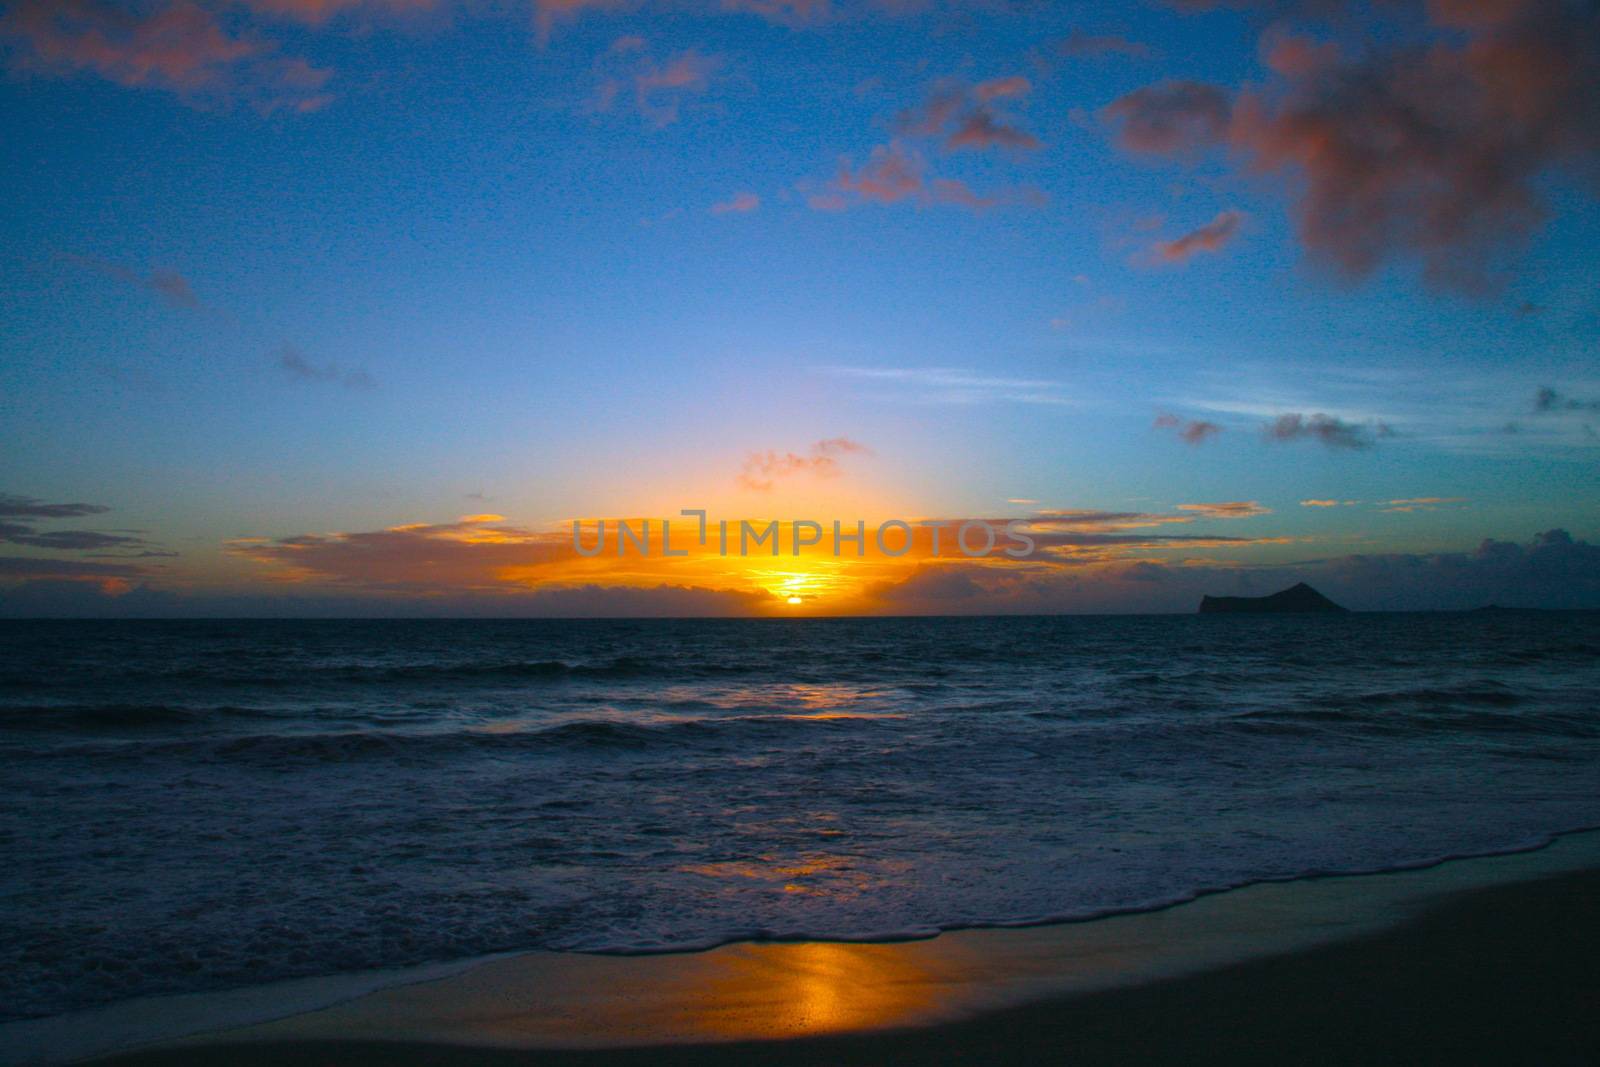 In images Rising sun on the horizon above a calm ocean or sea. On the blue sky white clouds